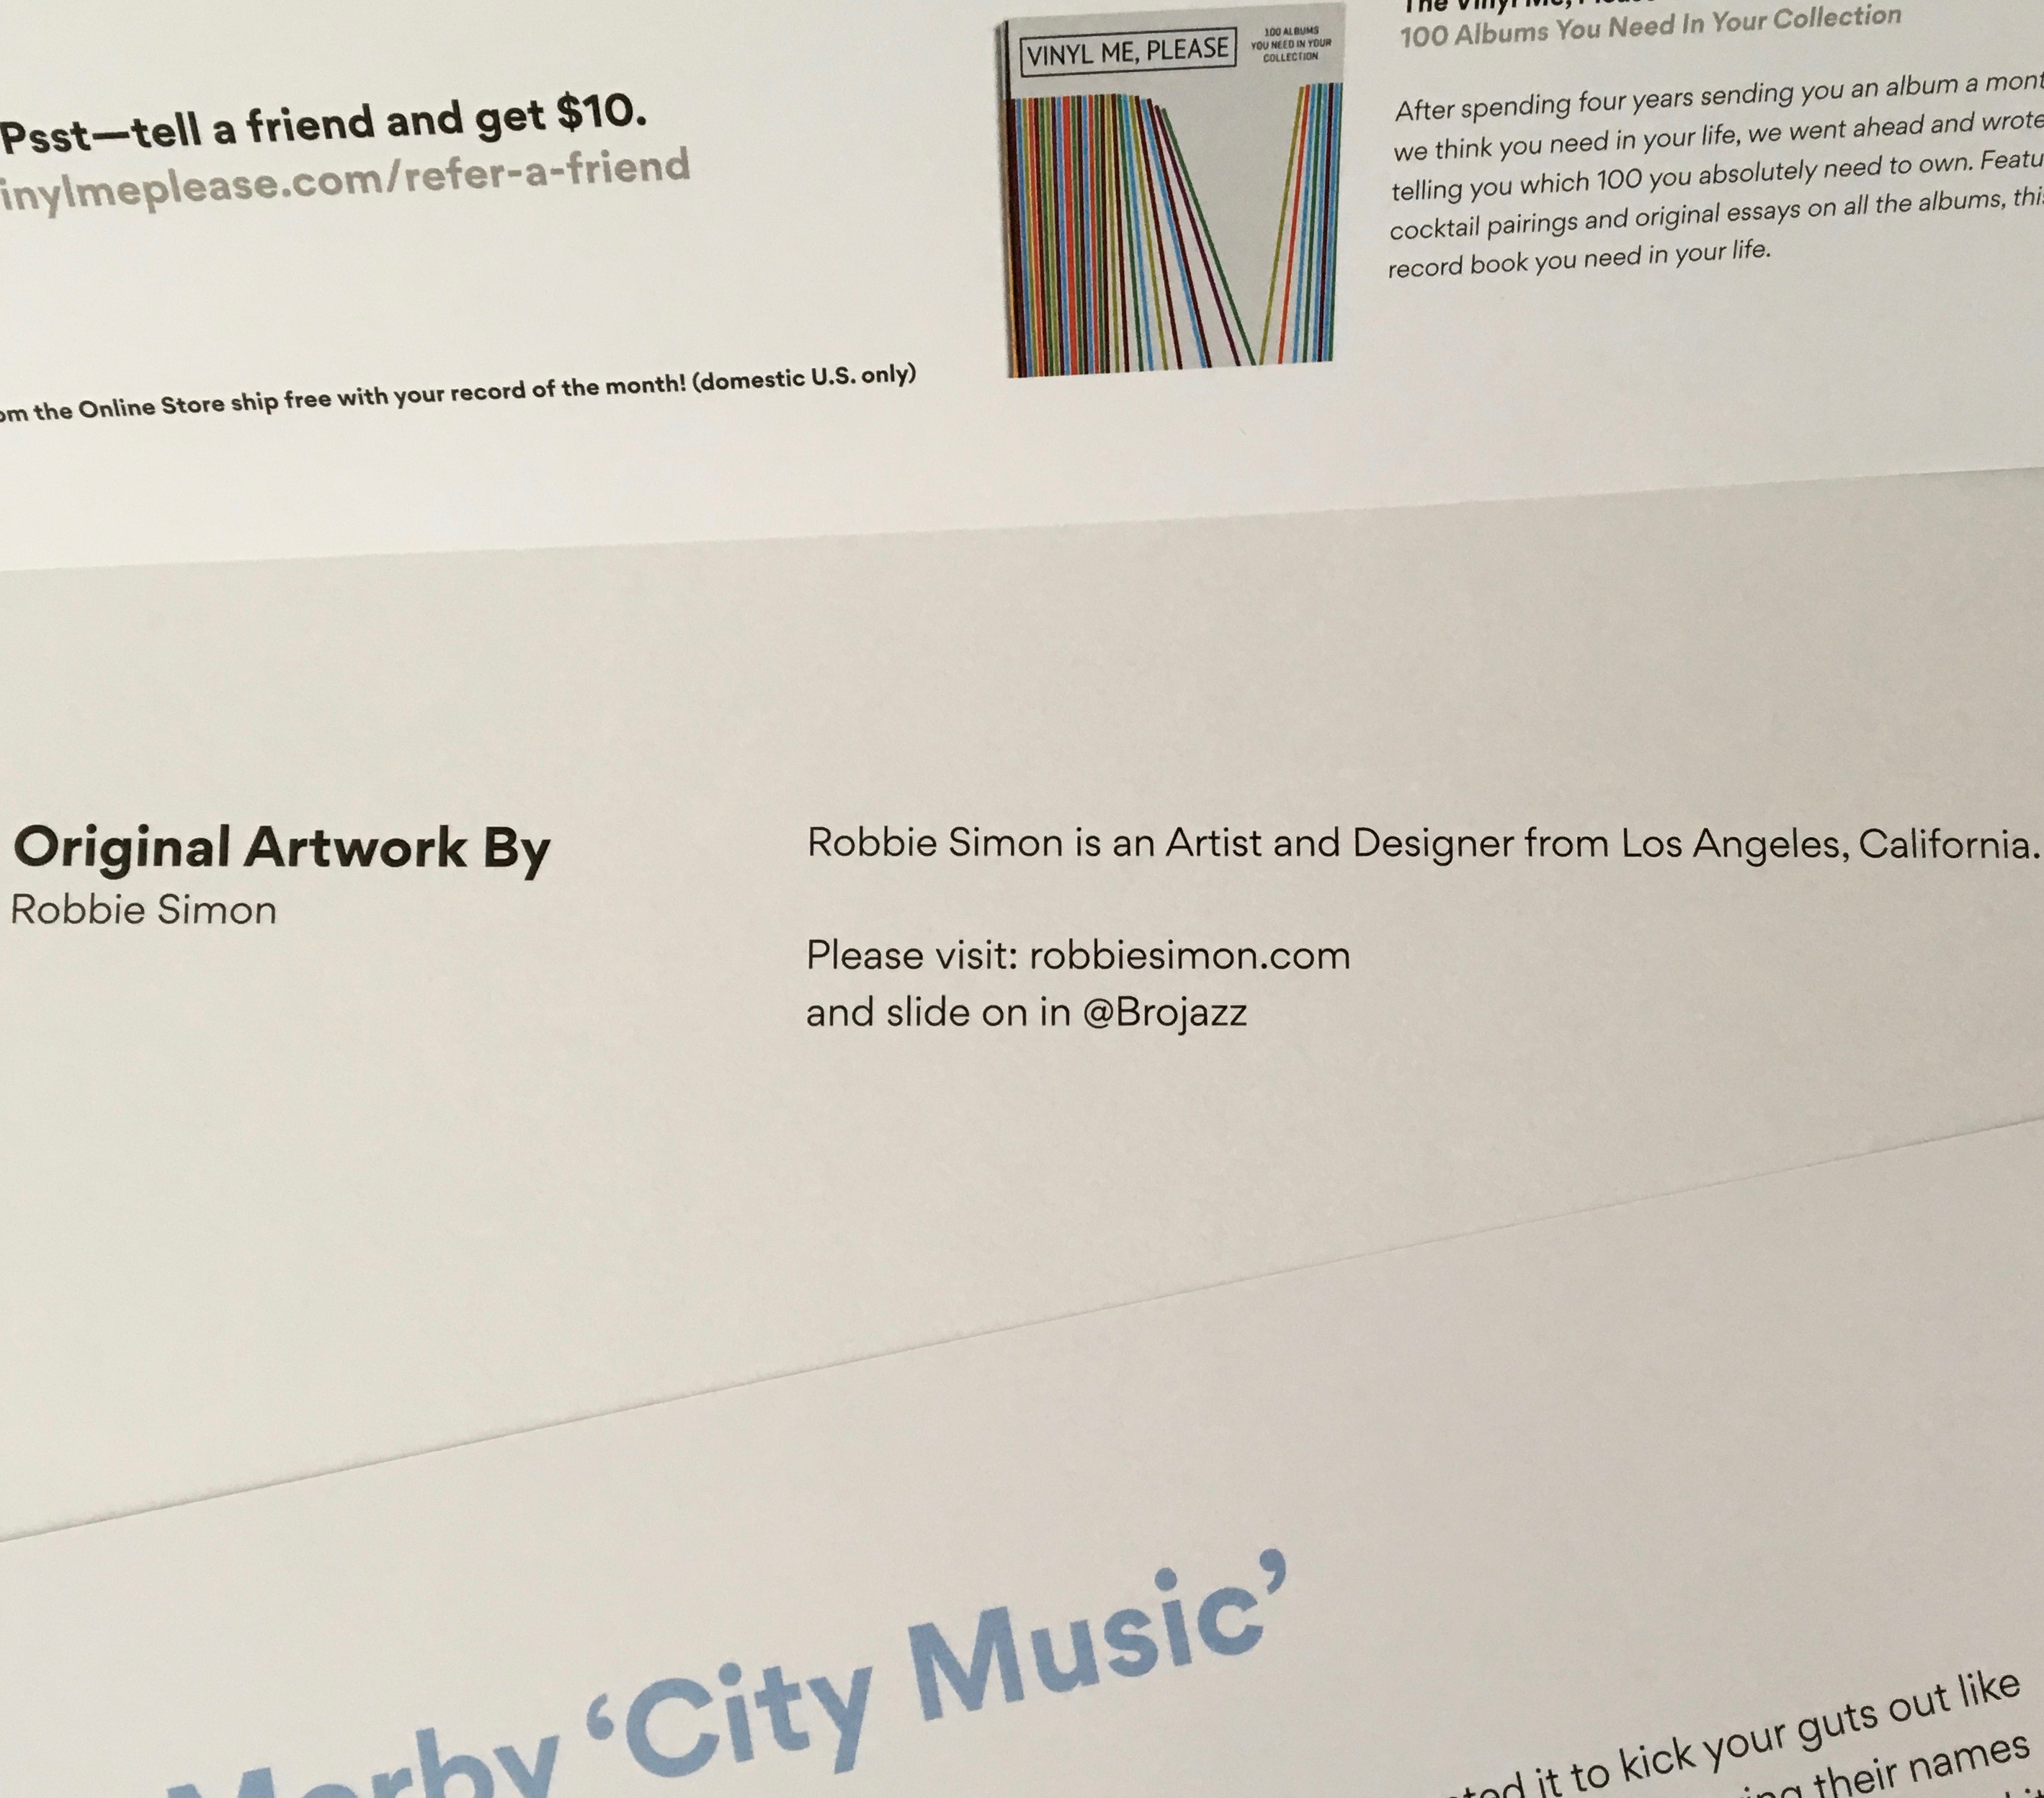 Geek insider, geekinsider, geekinsider. Com,, vinyl me, please june edition: kevin morby 'city music', culture, events